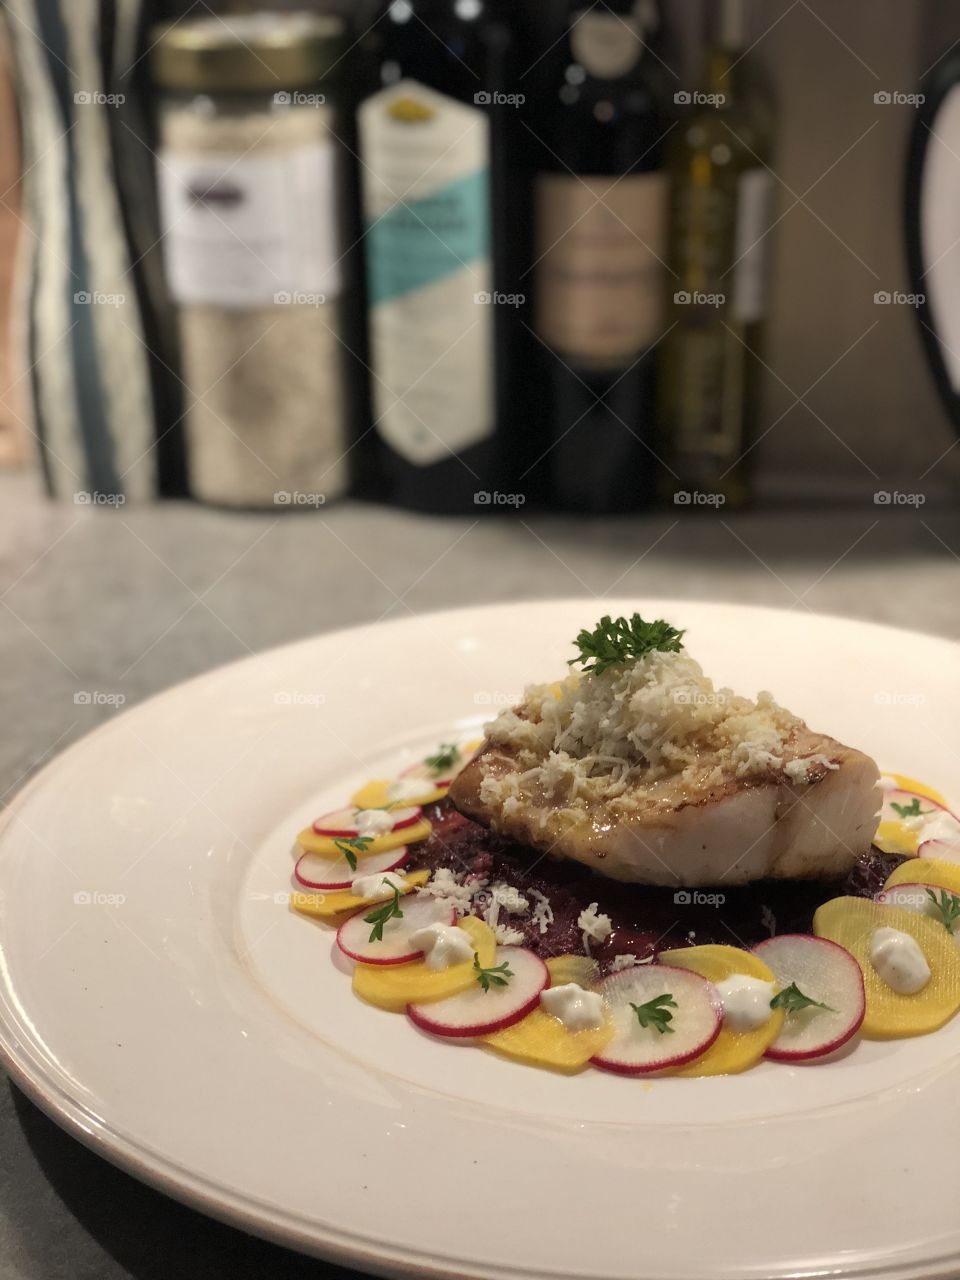 Amazing cod served with hash brownie made of beets and some pickled radish topped with horseradish